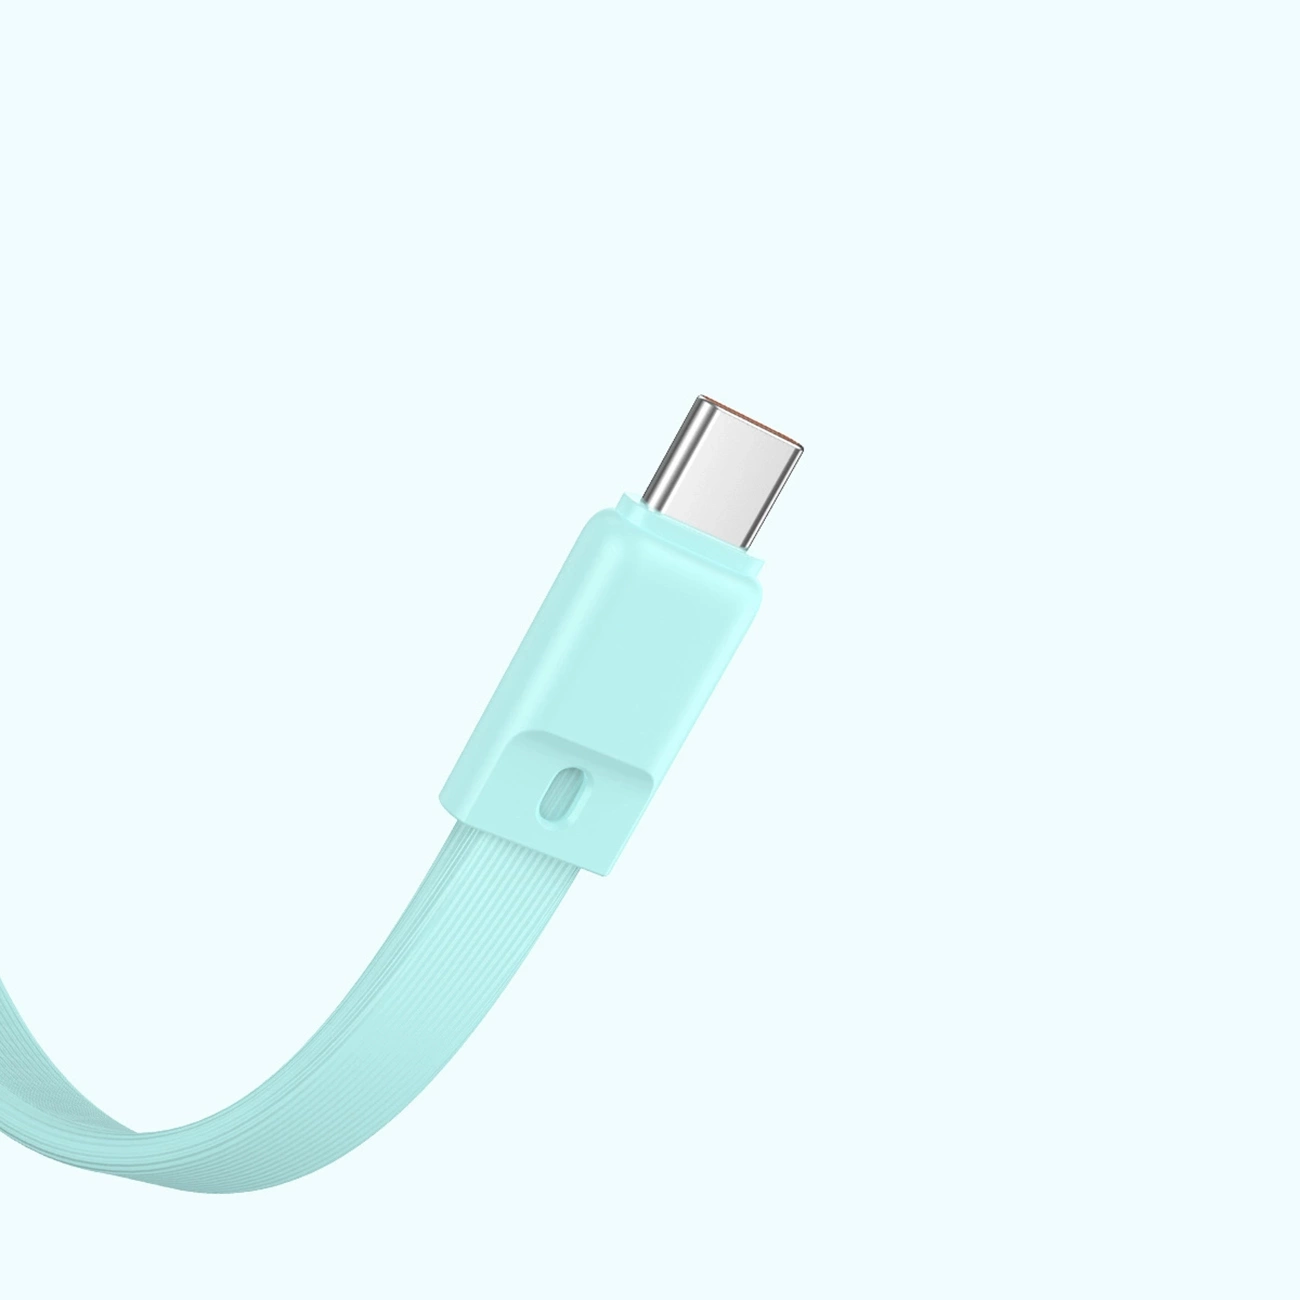 Cable with a USB-C connector on a blue background